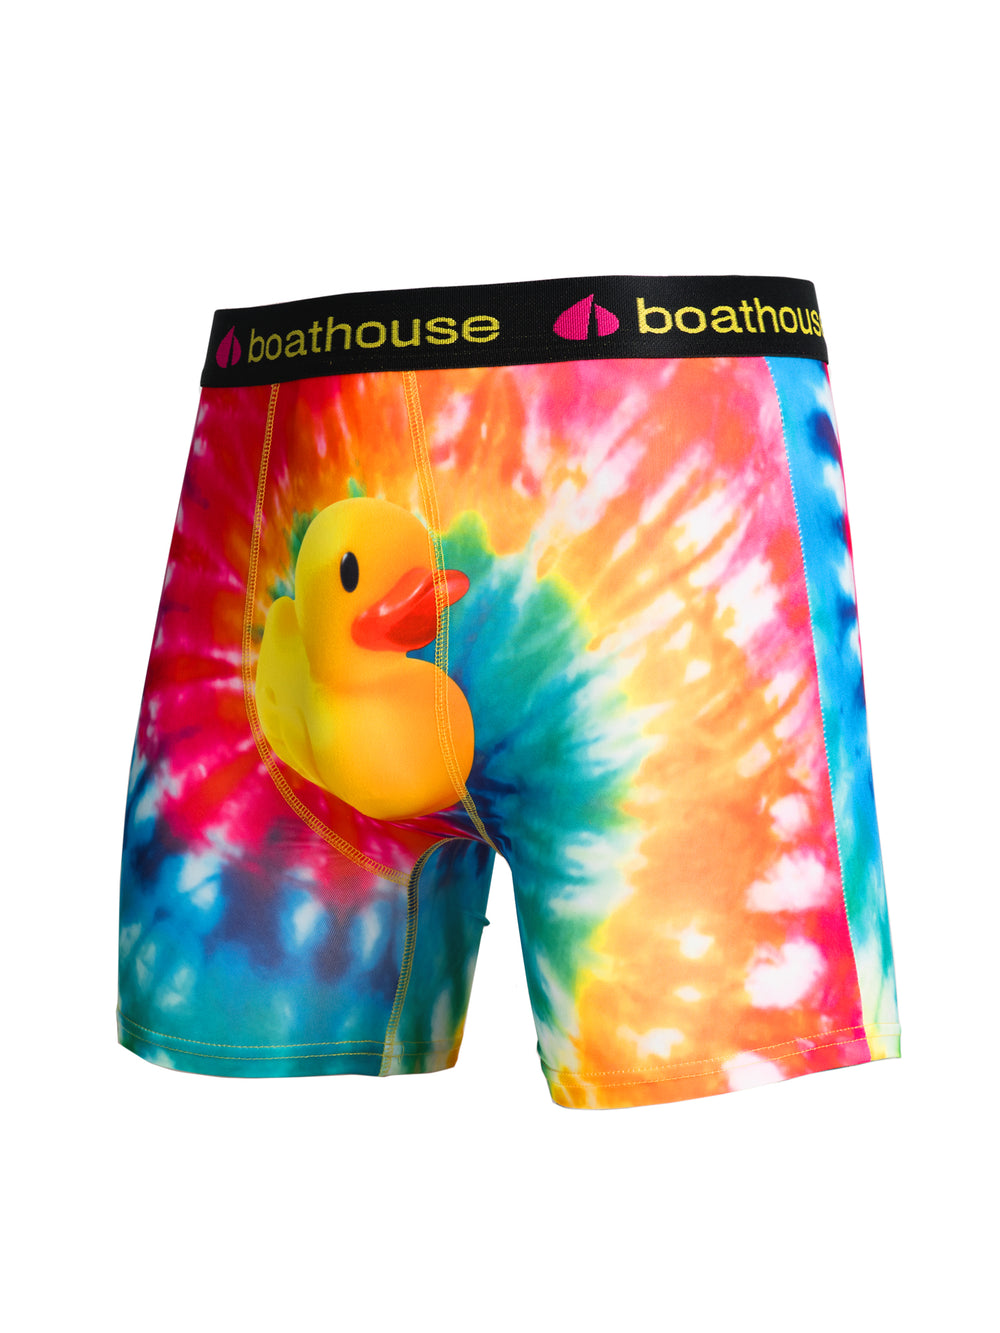 BOATHOUSE NOVELTY BOXER BRIEF - TIE DYE DUCK - CLEARANCE